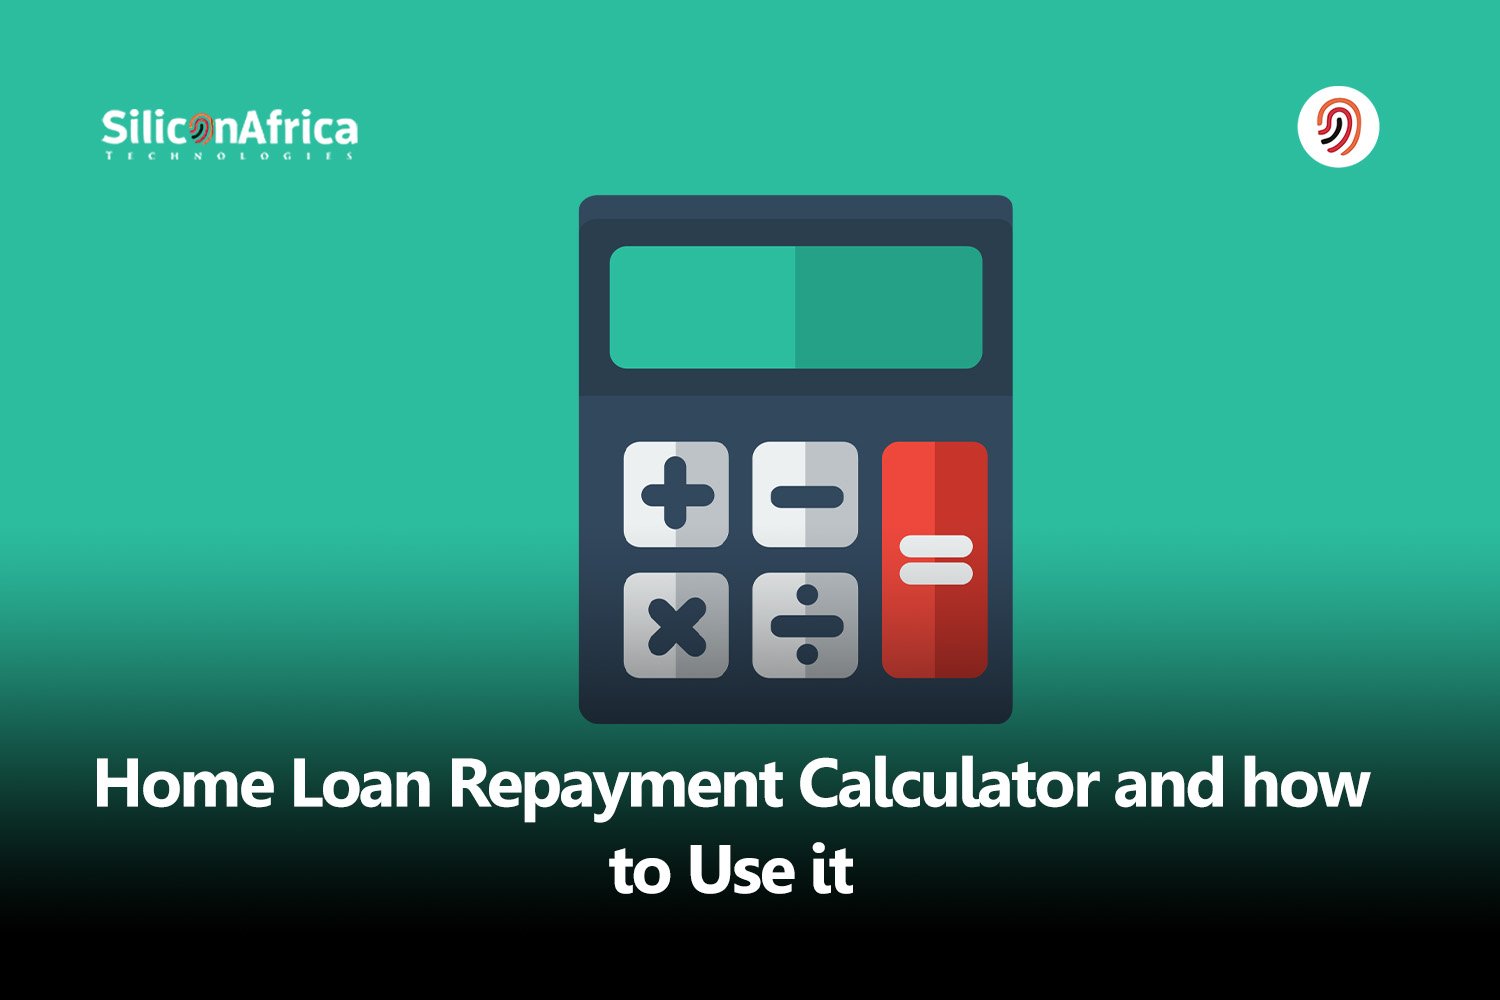 Home Loan Repayment Calculator and How to Use It